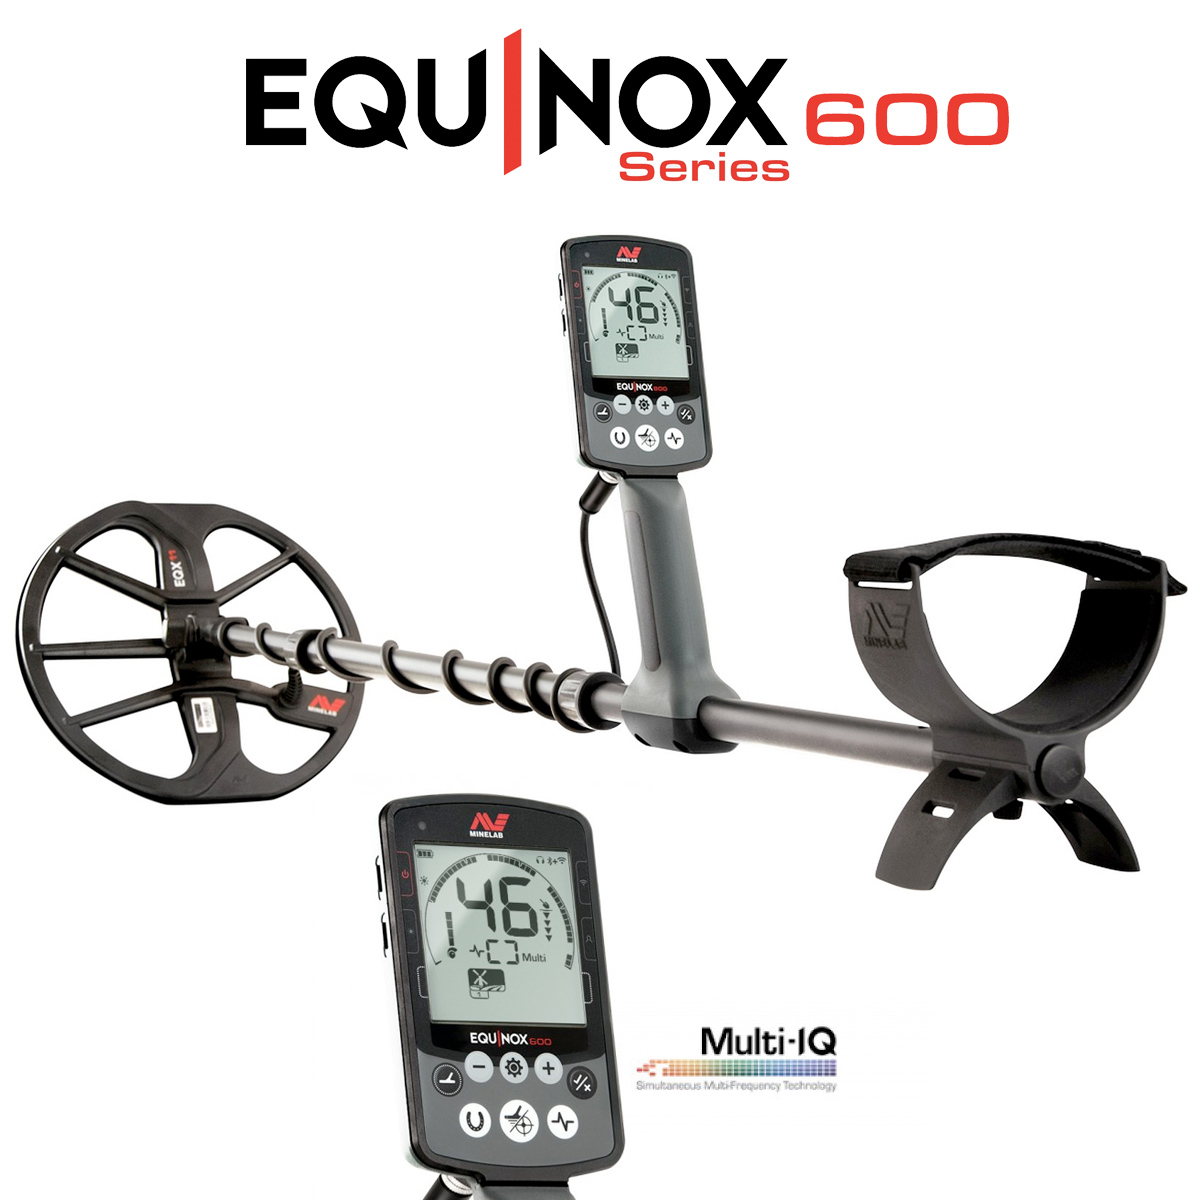 Minelab Equinox 600 Multi-IQ Metal Detector with Pro-Find 15 Pinpointer  通販